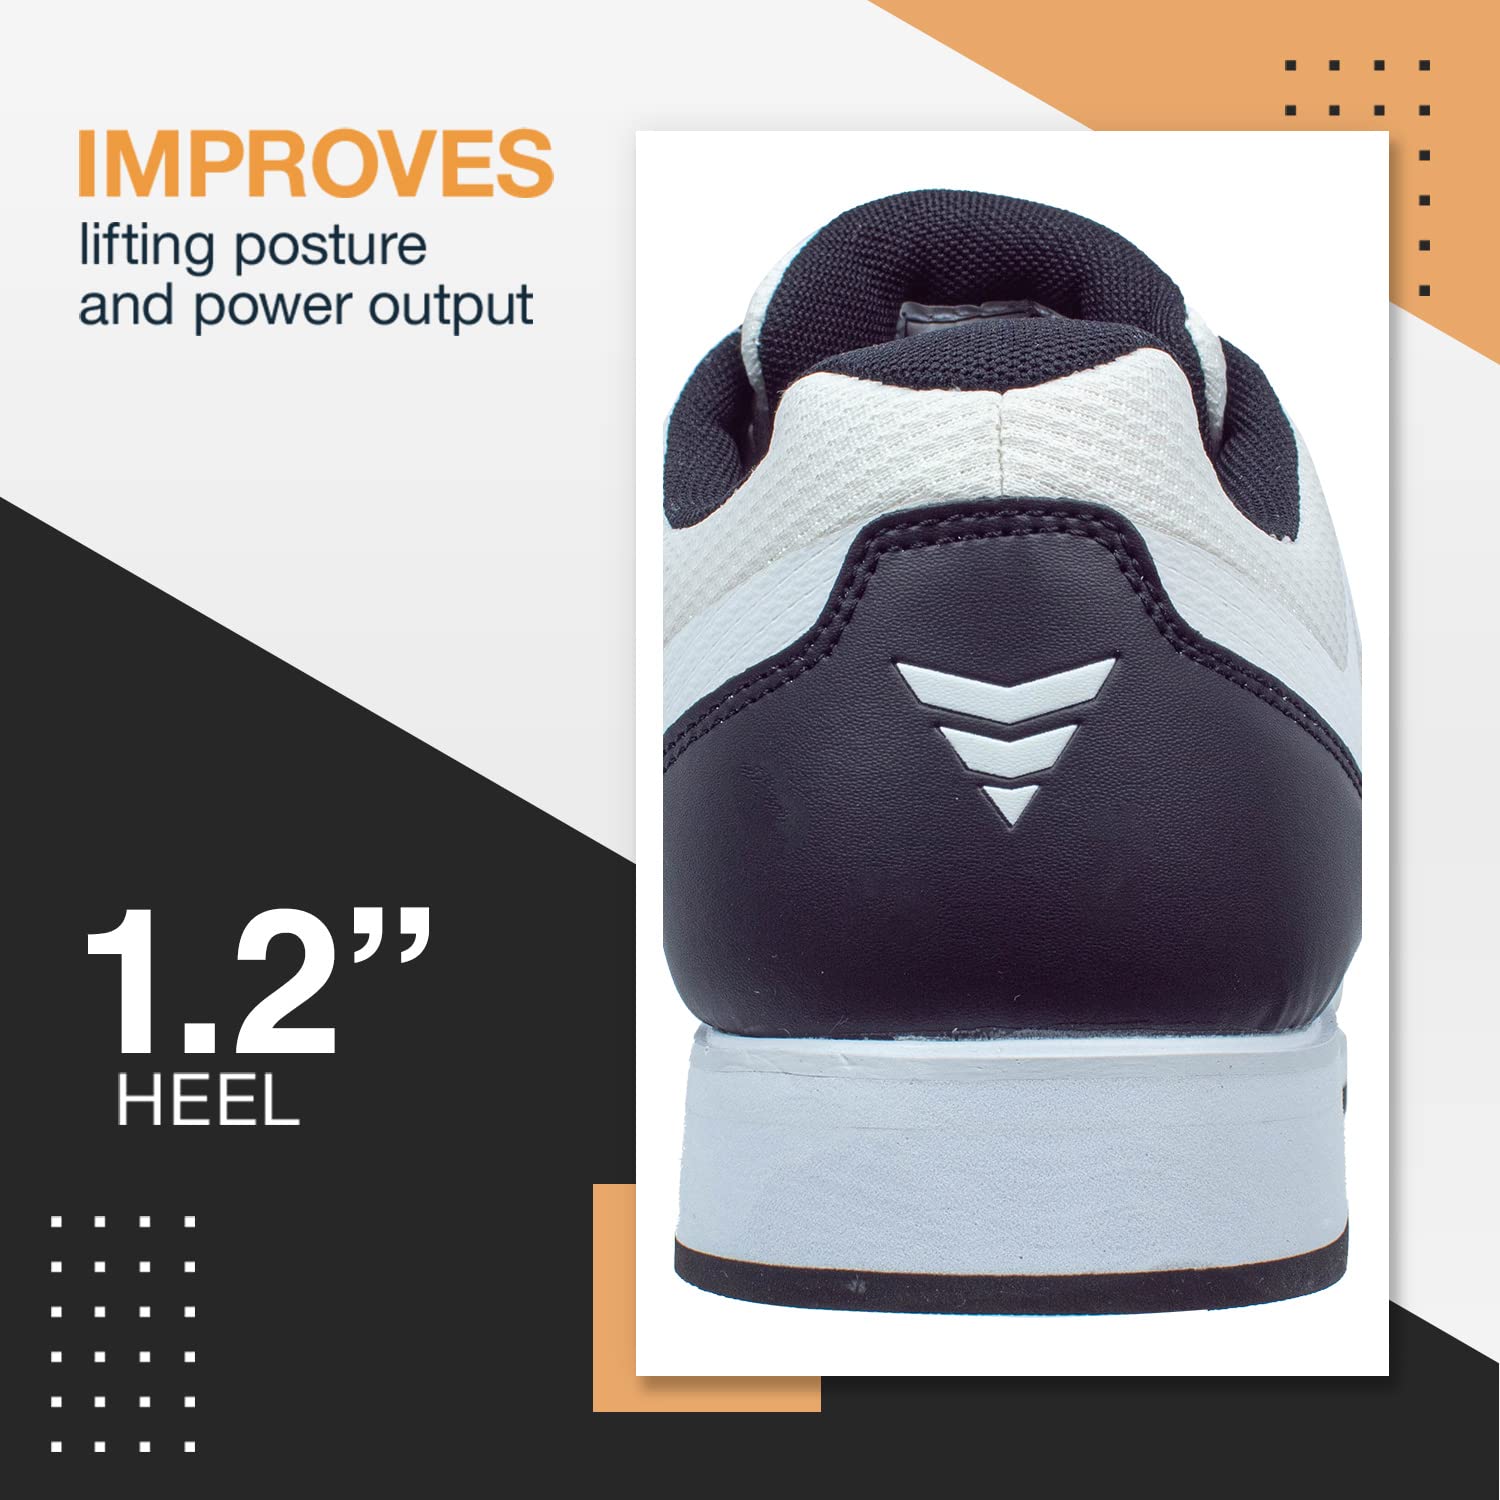 Mua Core Weightlifting Shoes - Squat Shoes for Powerlifting, Crossfit ...